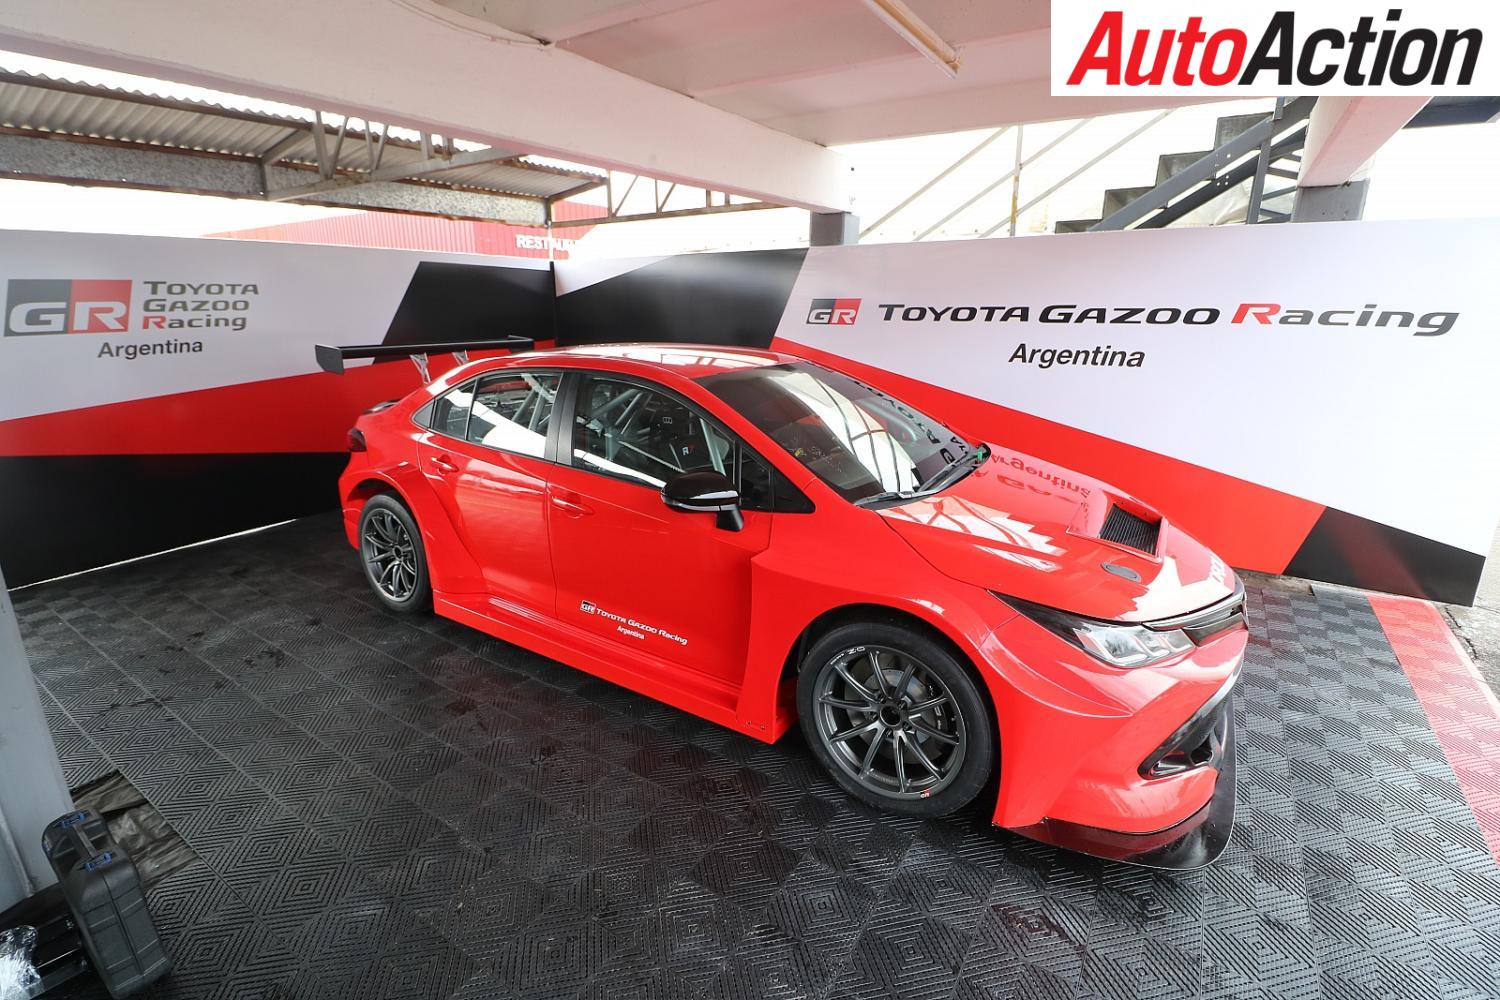 Toyota TCR racer revealed - Image: Supplied